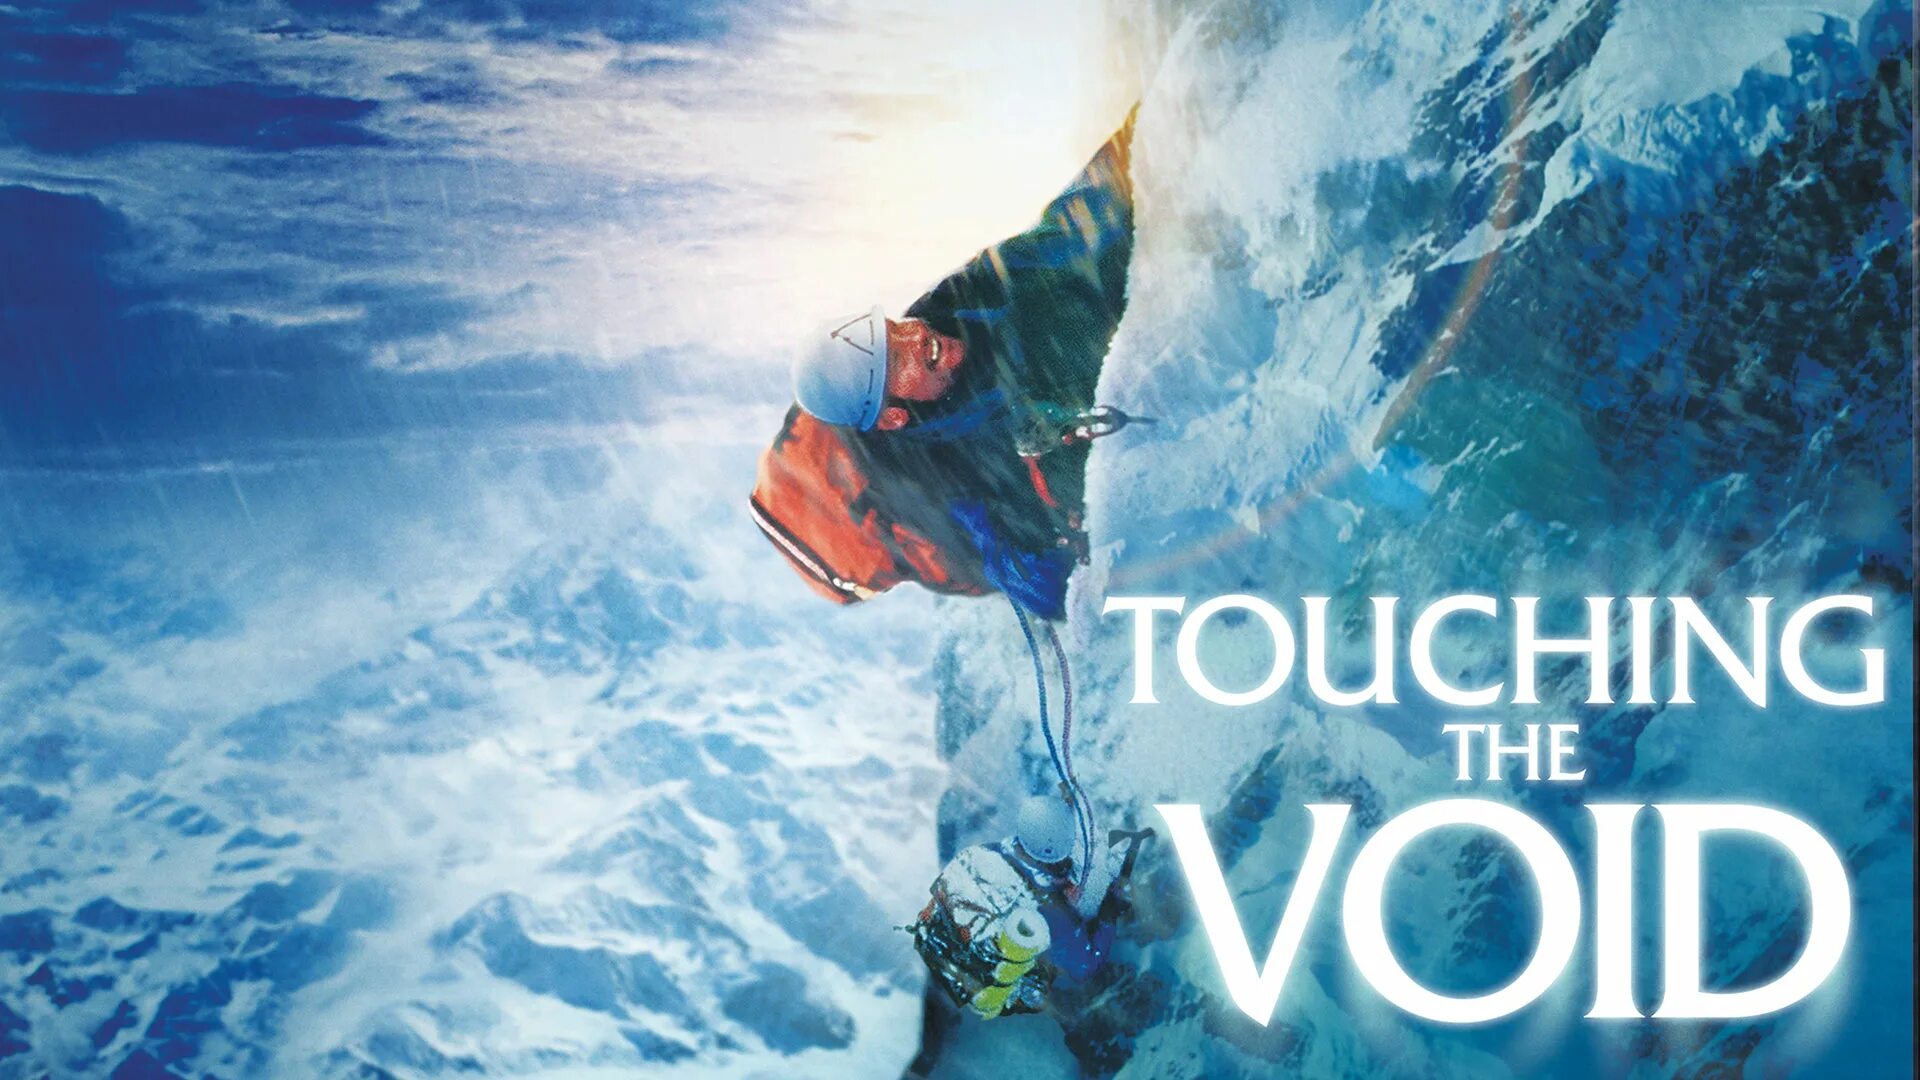 Feel the void. Touching the Void. Касаясь пустоты. Book Review touching the Void.